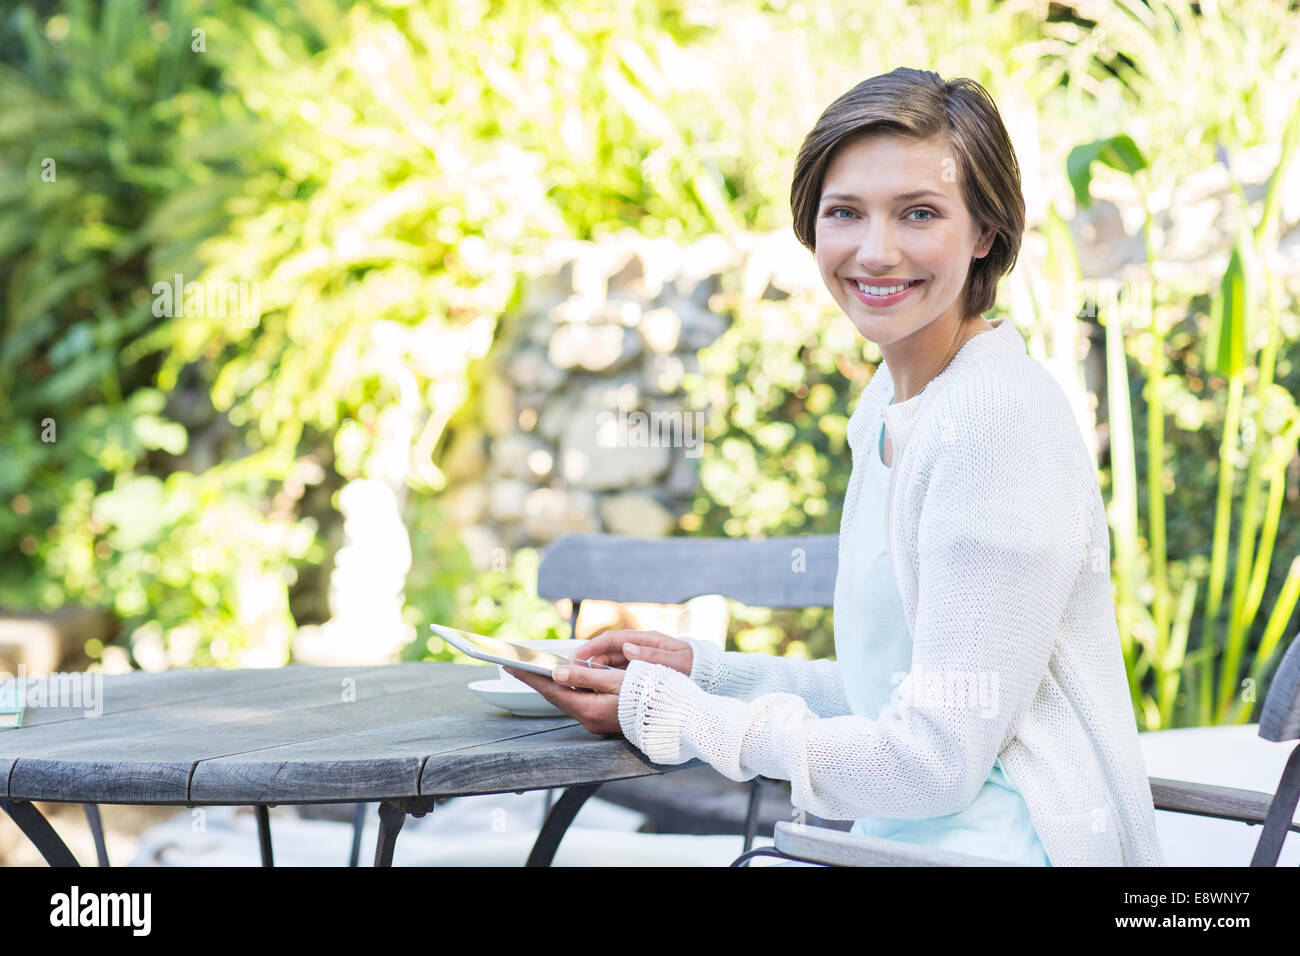 Woman using digital tablet at table outdoors Stock Photo